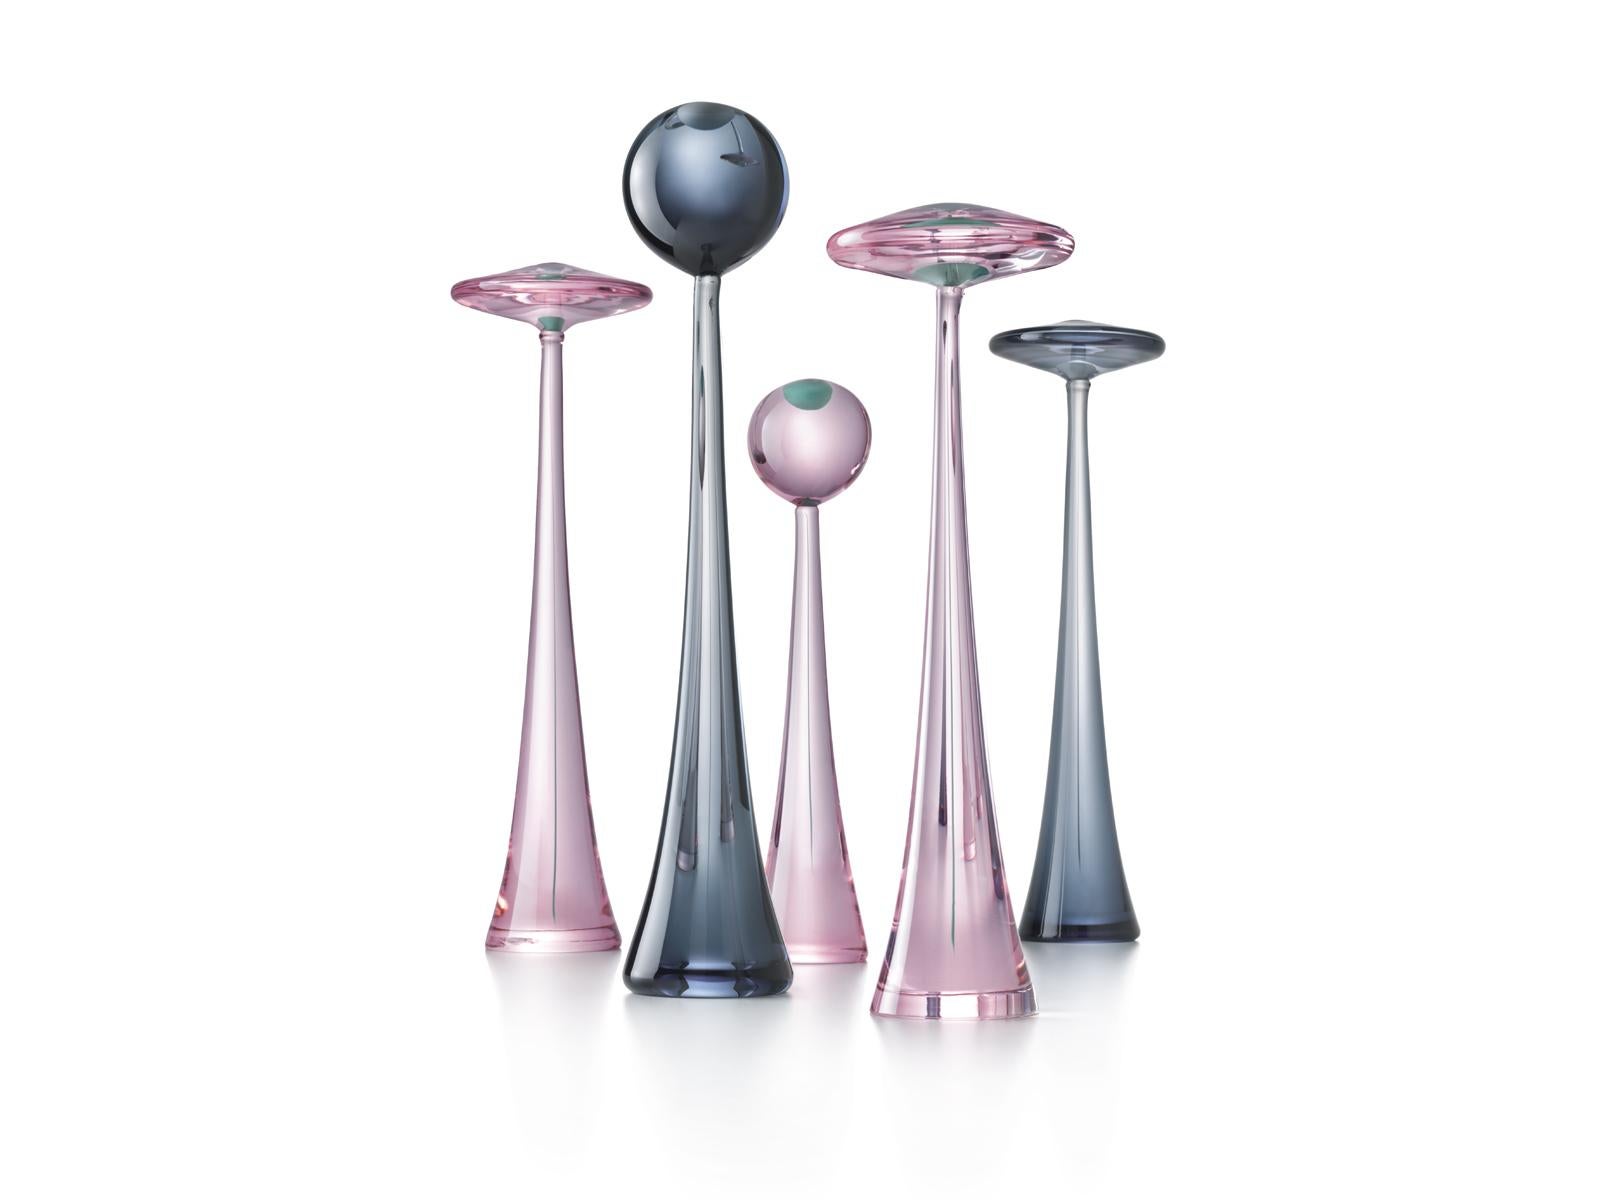 Elementi Lagunari, sculpture in pink and teal Murano's blown glass

Elementi Lagunari were among the first well-known collections by Luciano Gaspari designed in 1958 for Salviati, and are a perfect example of the aesthetics of the 1950s. These